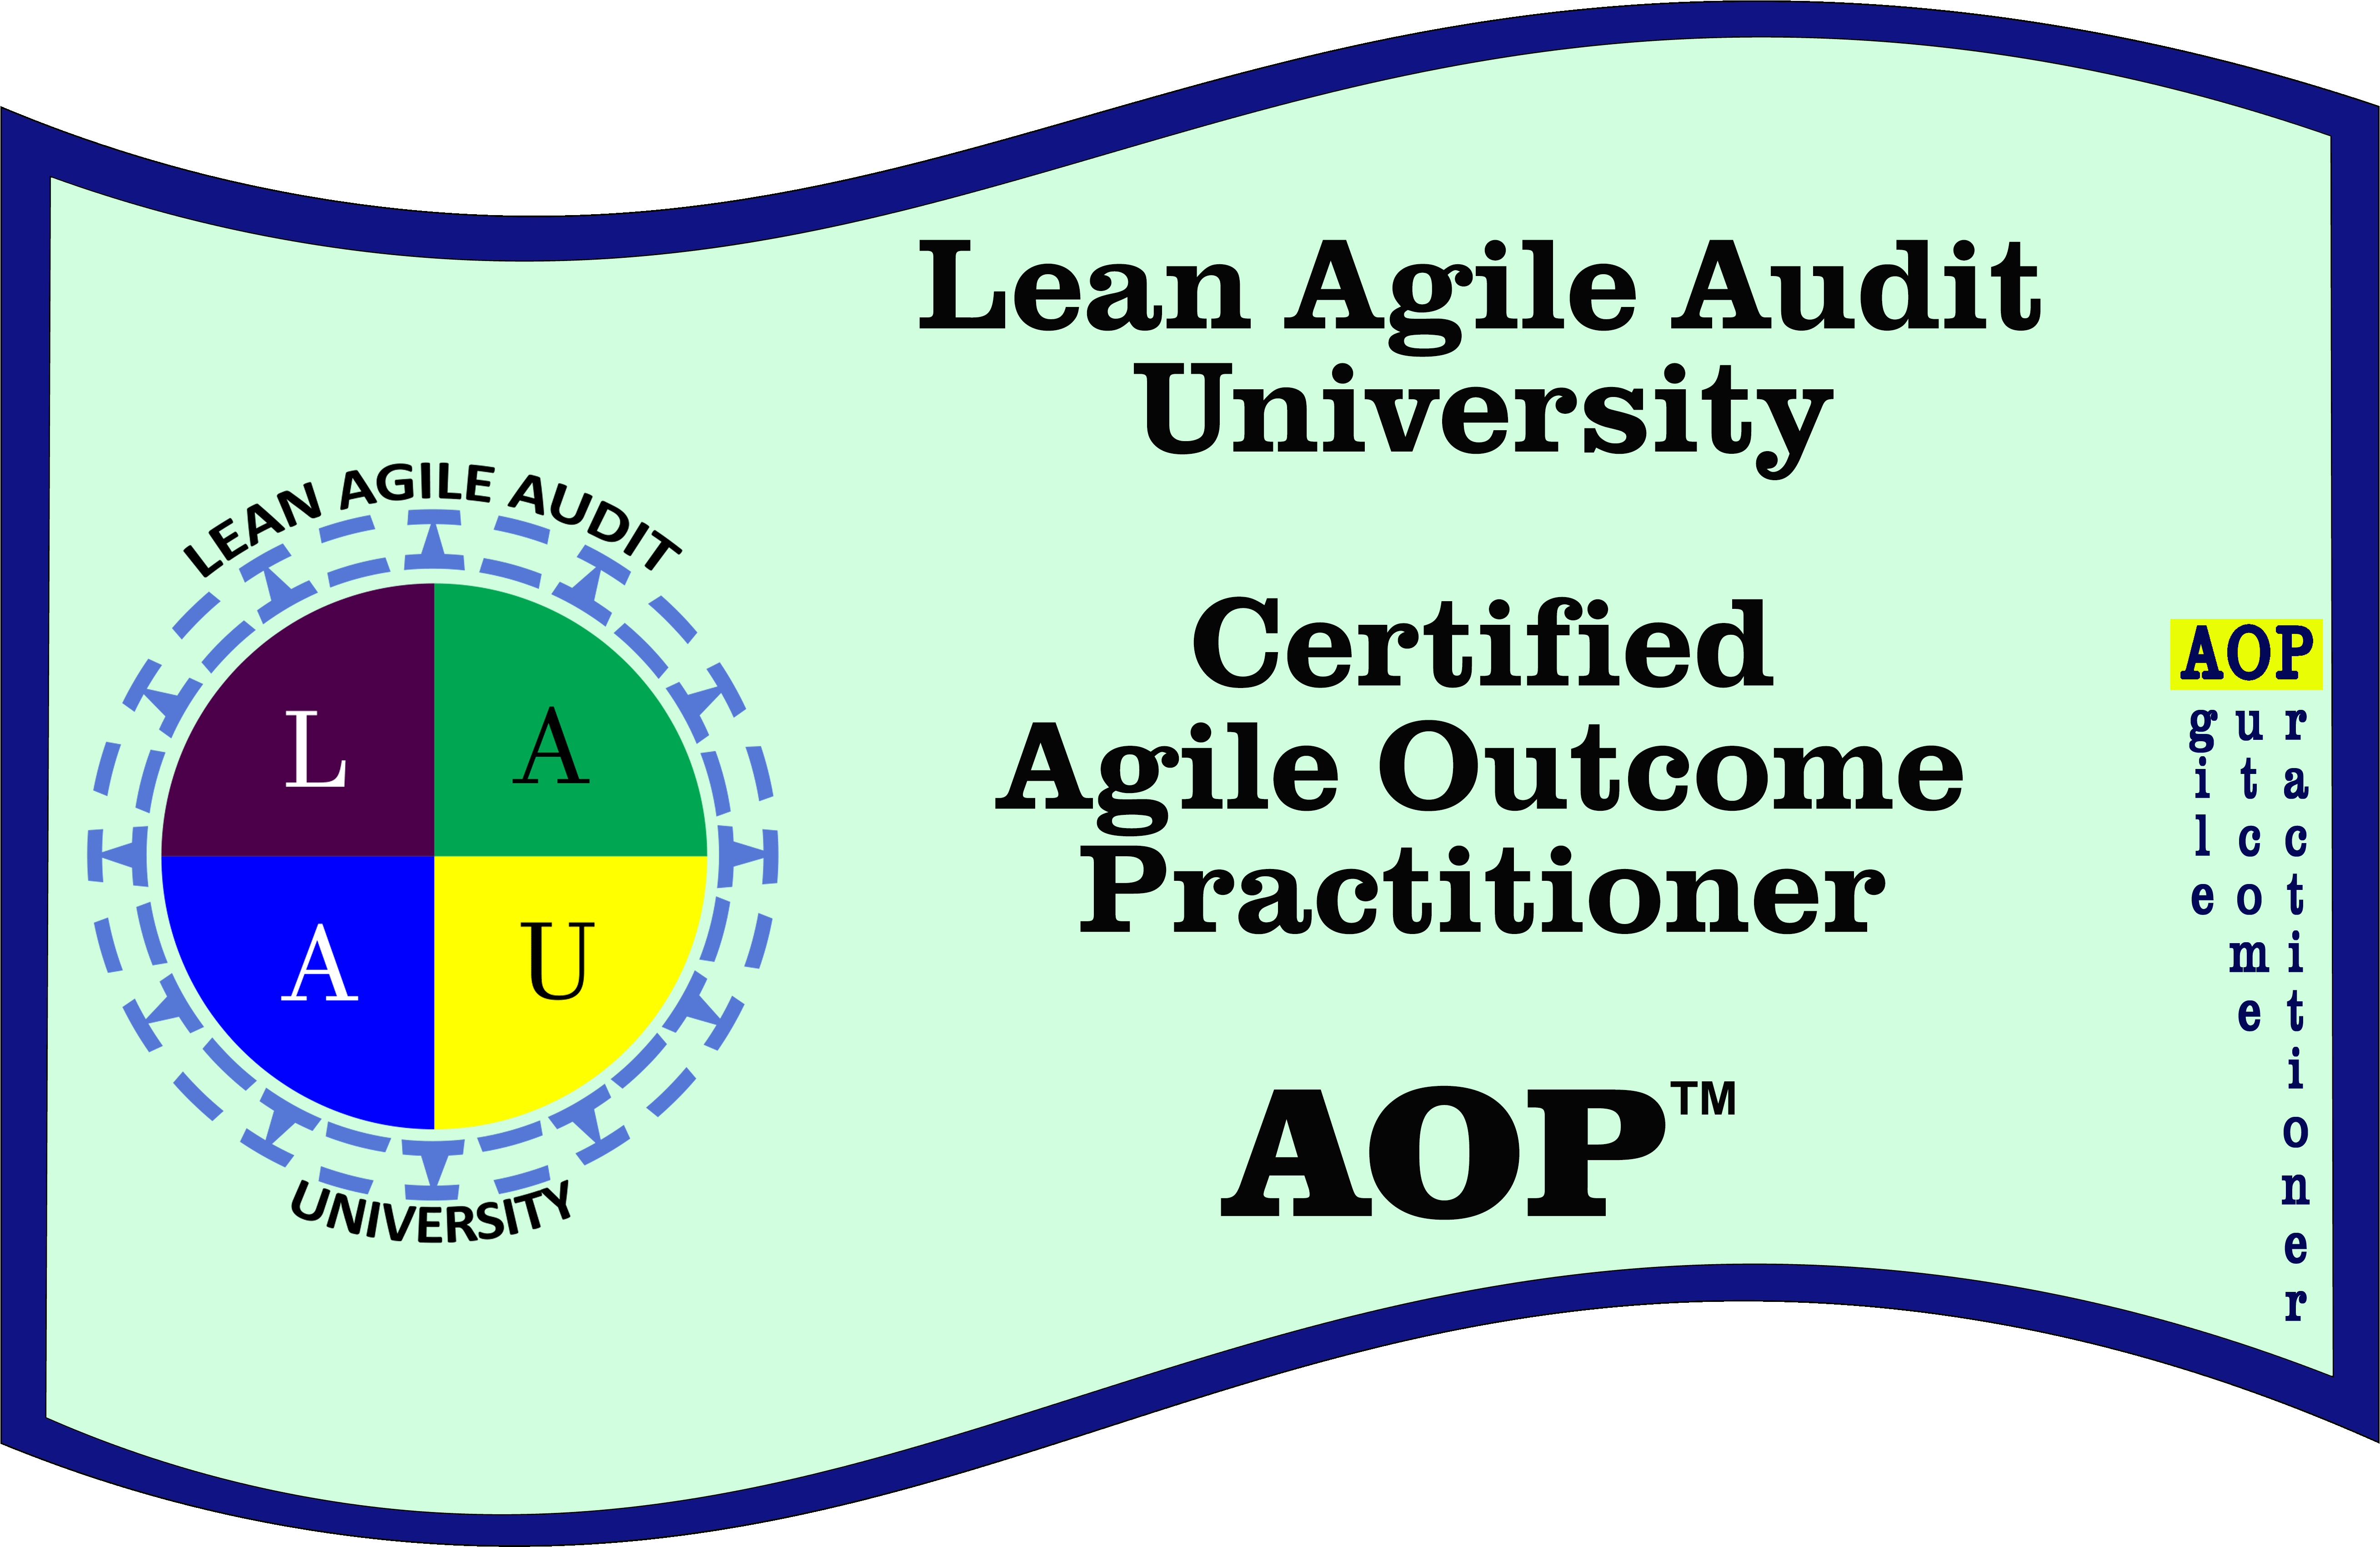 Be an Agile Outcome Practitioner